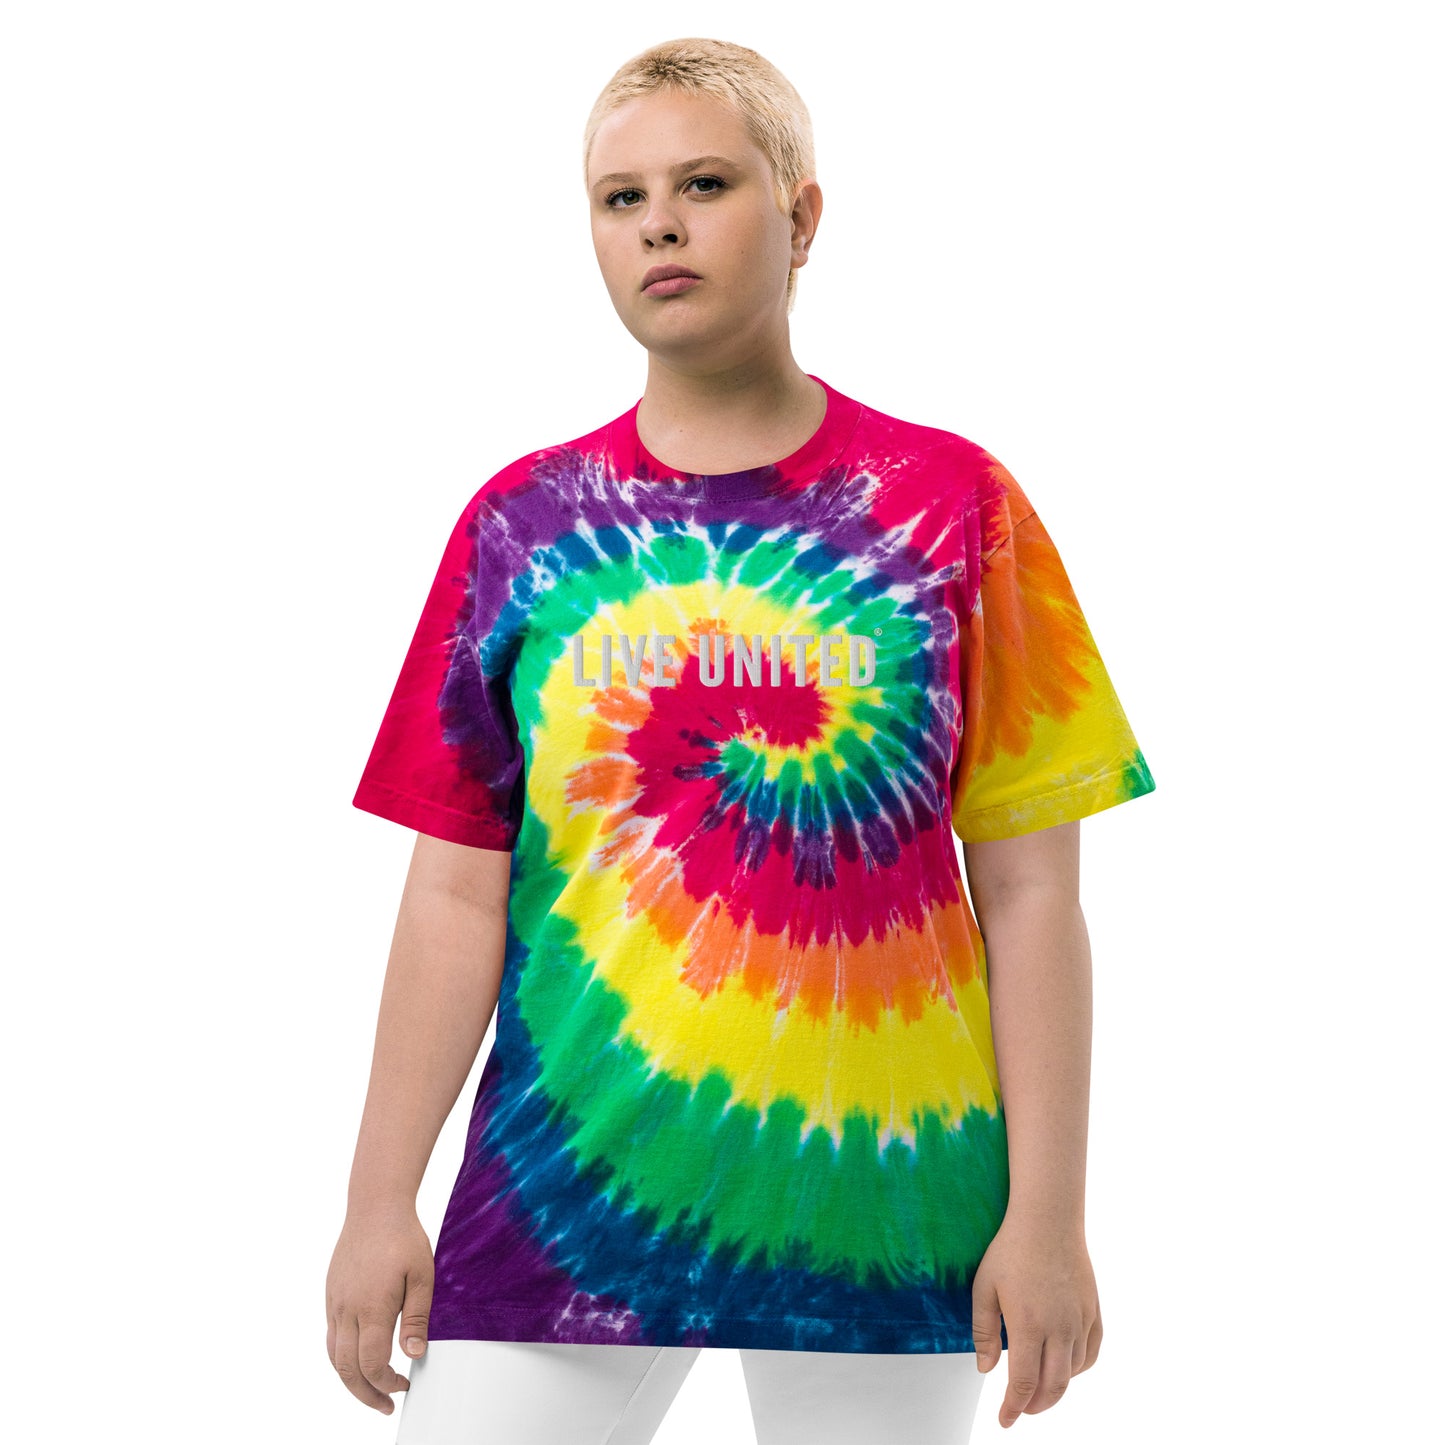 Embroidered Live United Unisex Oversized tie-dye t-shirt